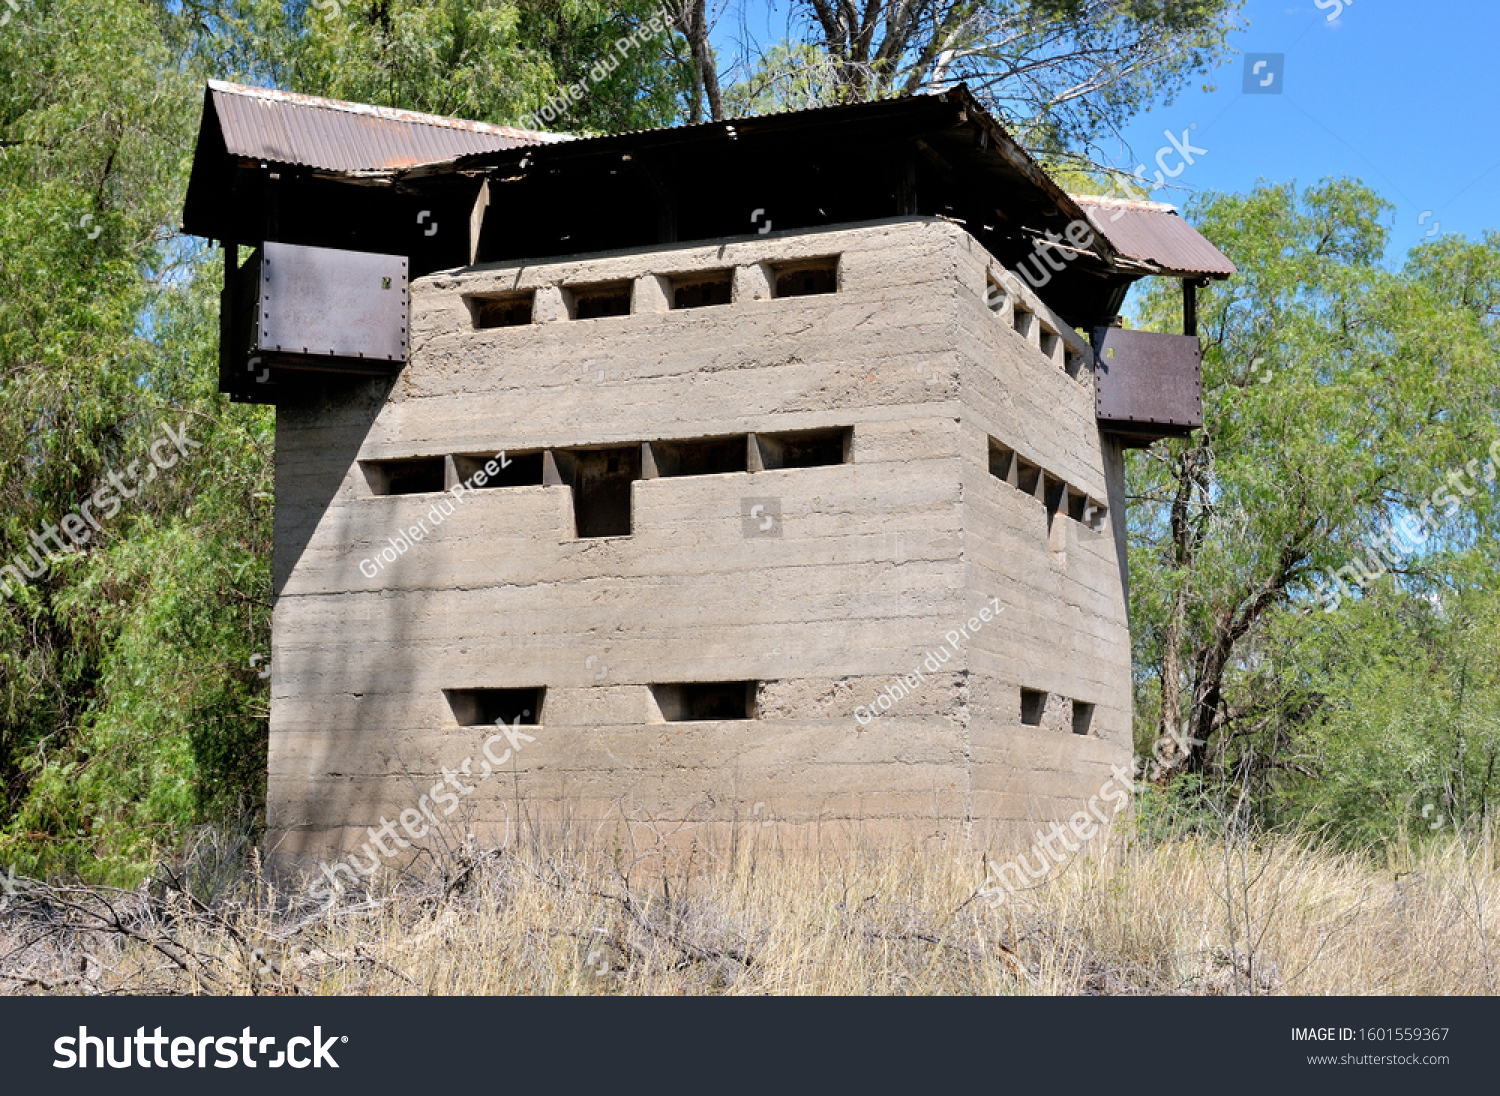 Krom River blockhouse south of Three Sisters in the Northern Cape Province of South Africa. Used by the British troups to defend the railway bridge during the second Boer War 1899-1902.
 #1601559367